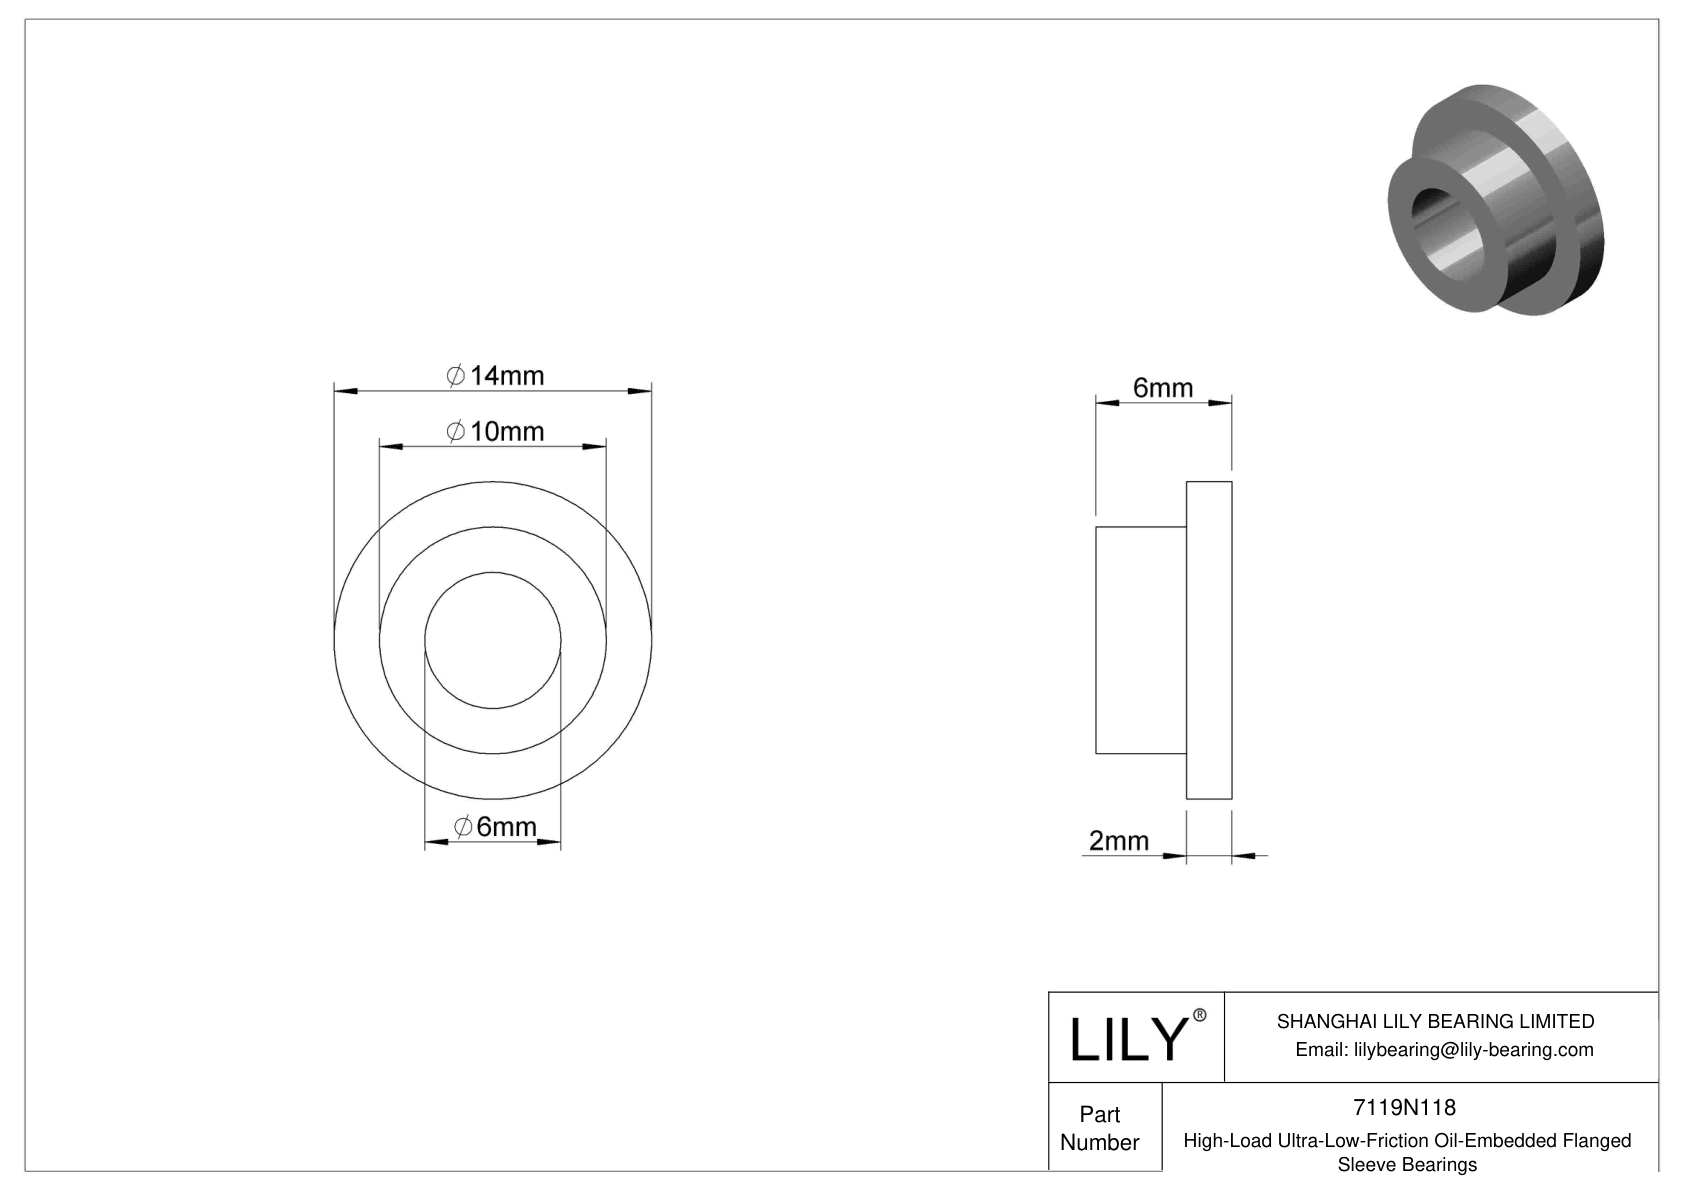 HBBJNBBI High-Load Ultra-Low-Friction Oil-Embedded Flanged Sleeve Bearings cad drawing